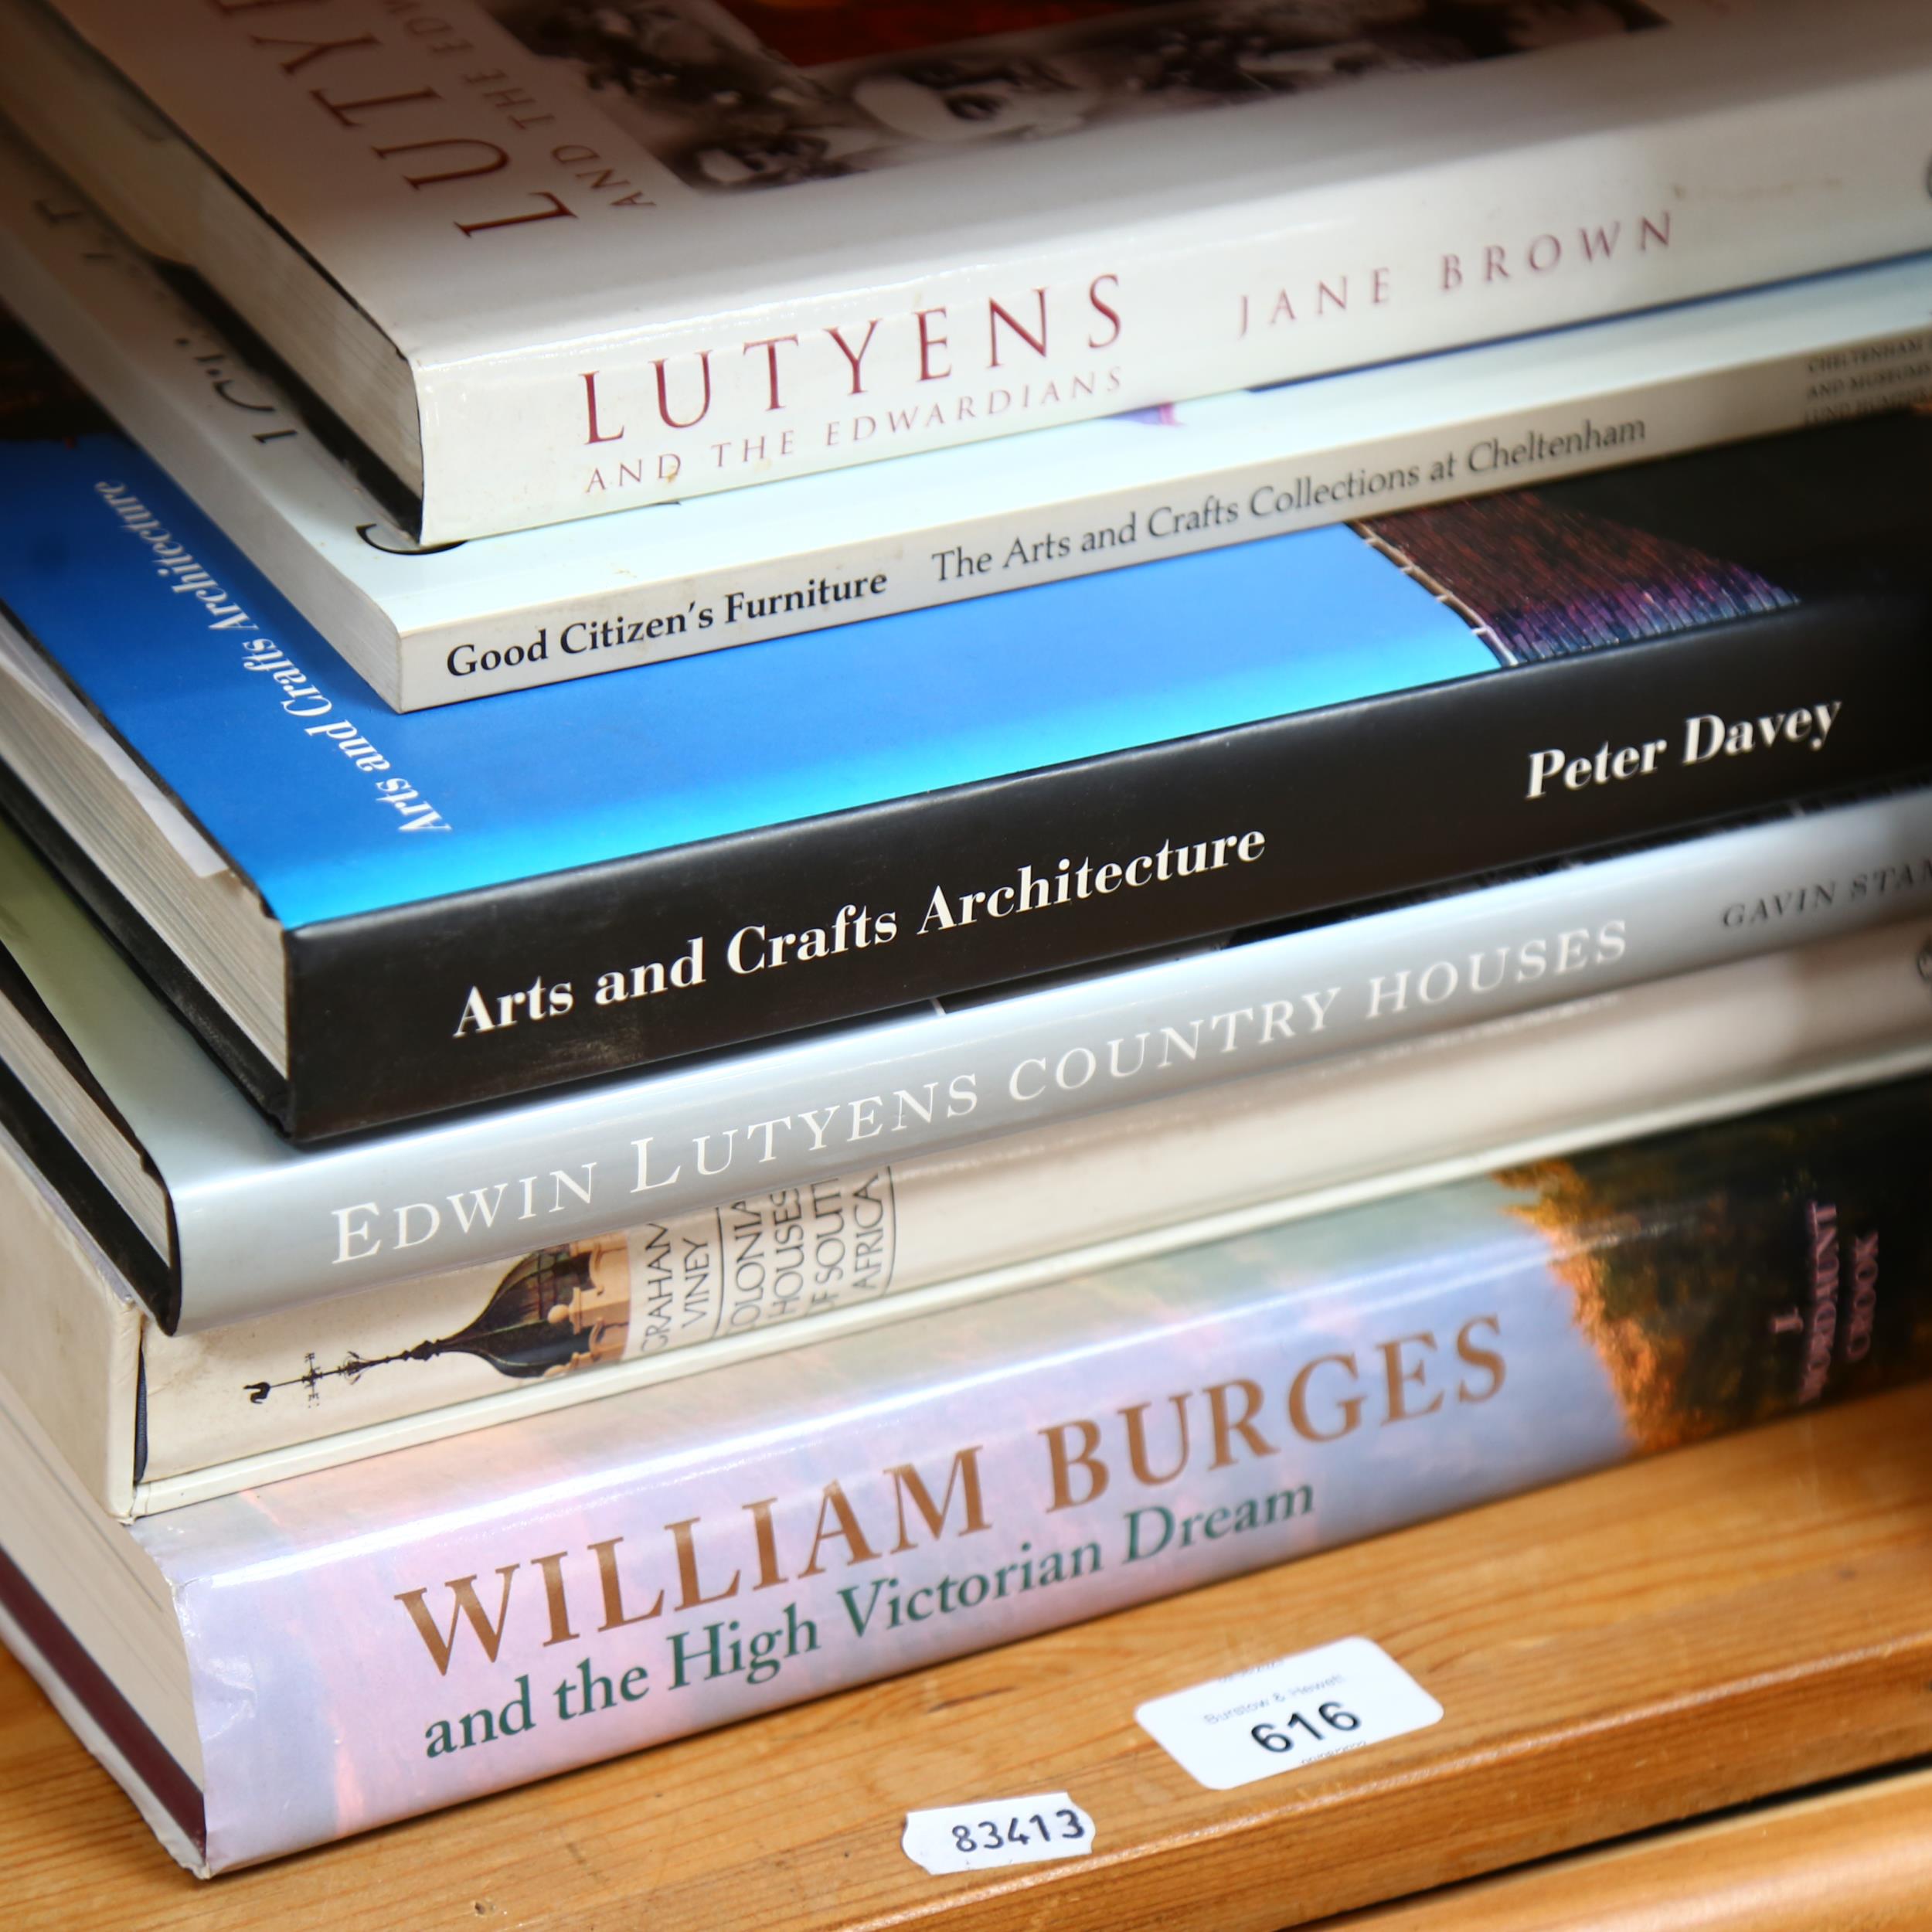 Reference books on architects including Lutyens, and William Burges "The High Victorian Dream" - Image 2 of 2